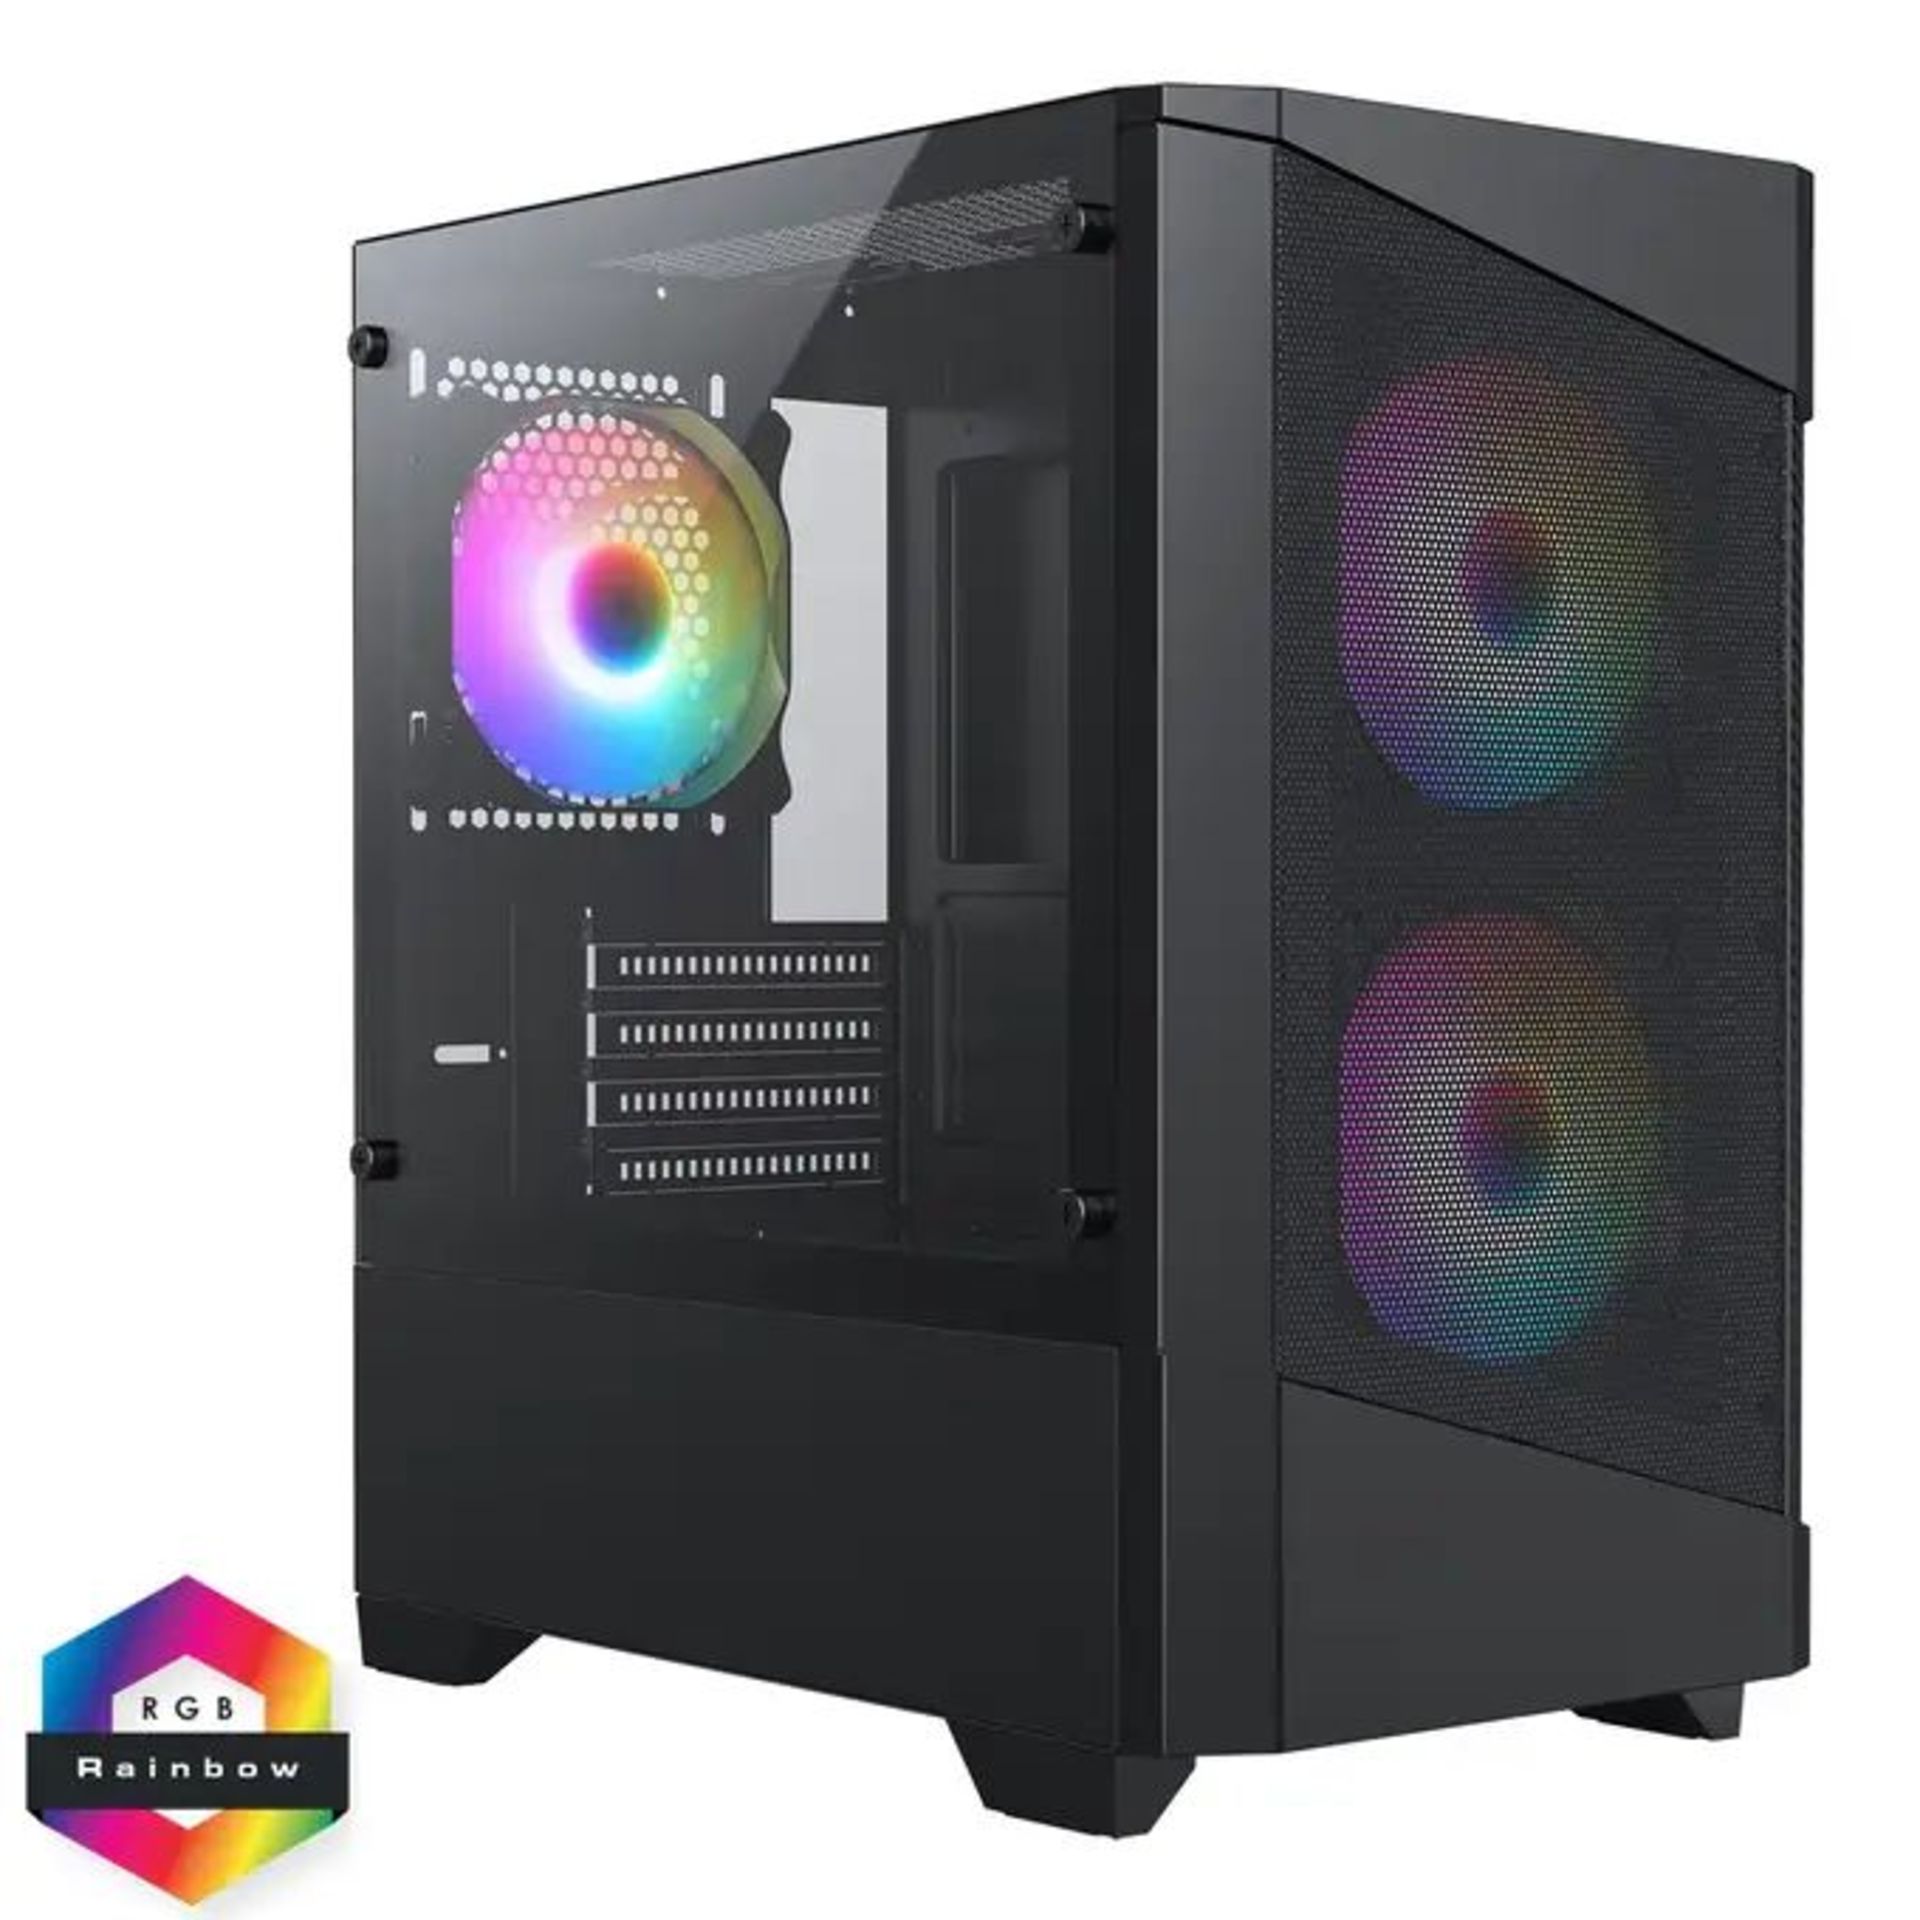 CiT Level 1 Black Micro-ATX Mesh PC Gaming Case with 3 x 120mm RGB Rainbow Fans Included With